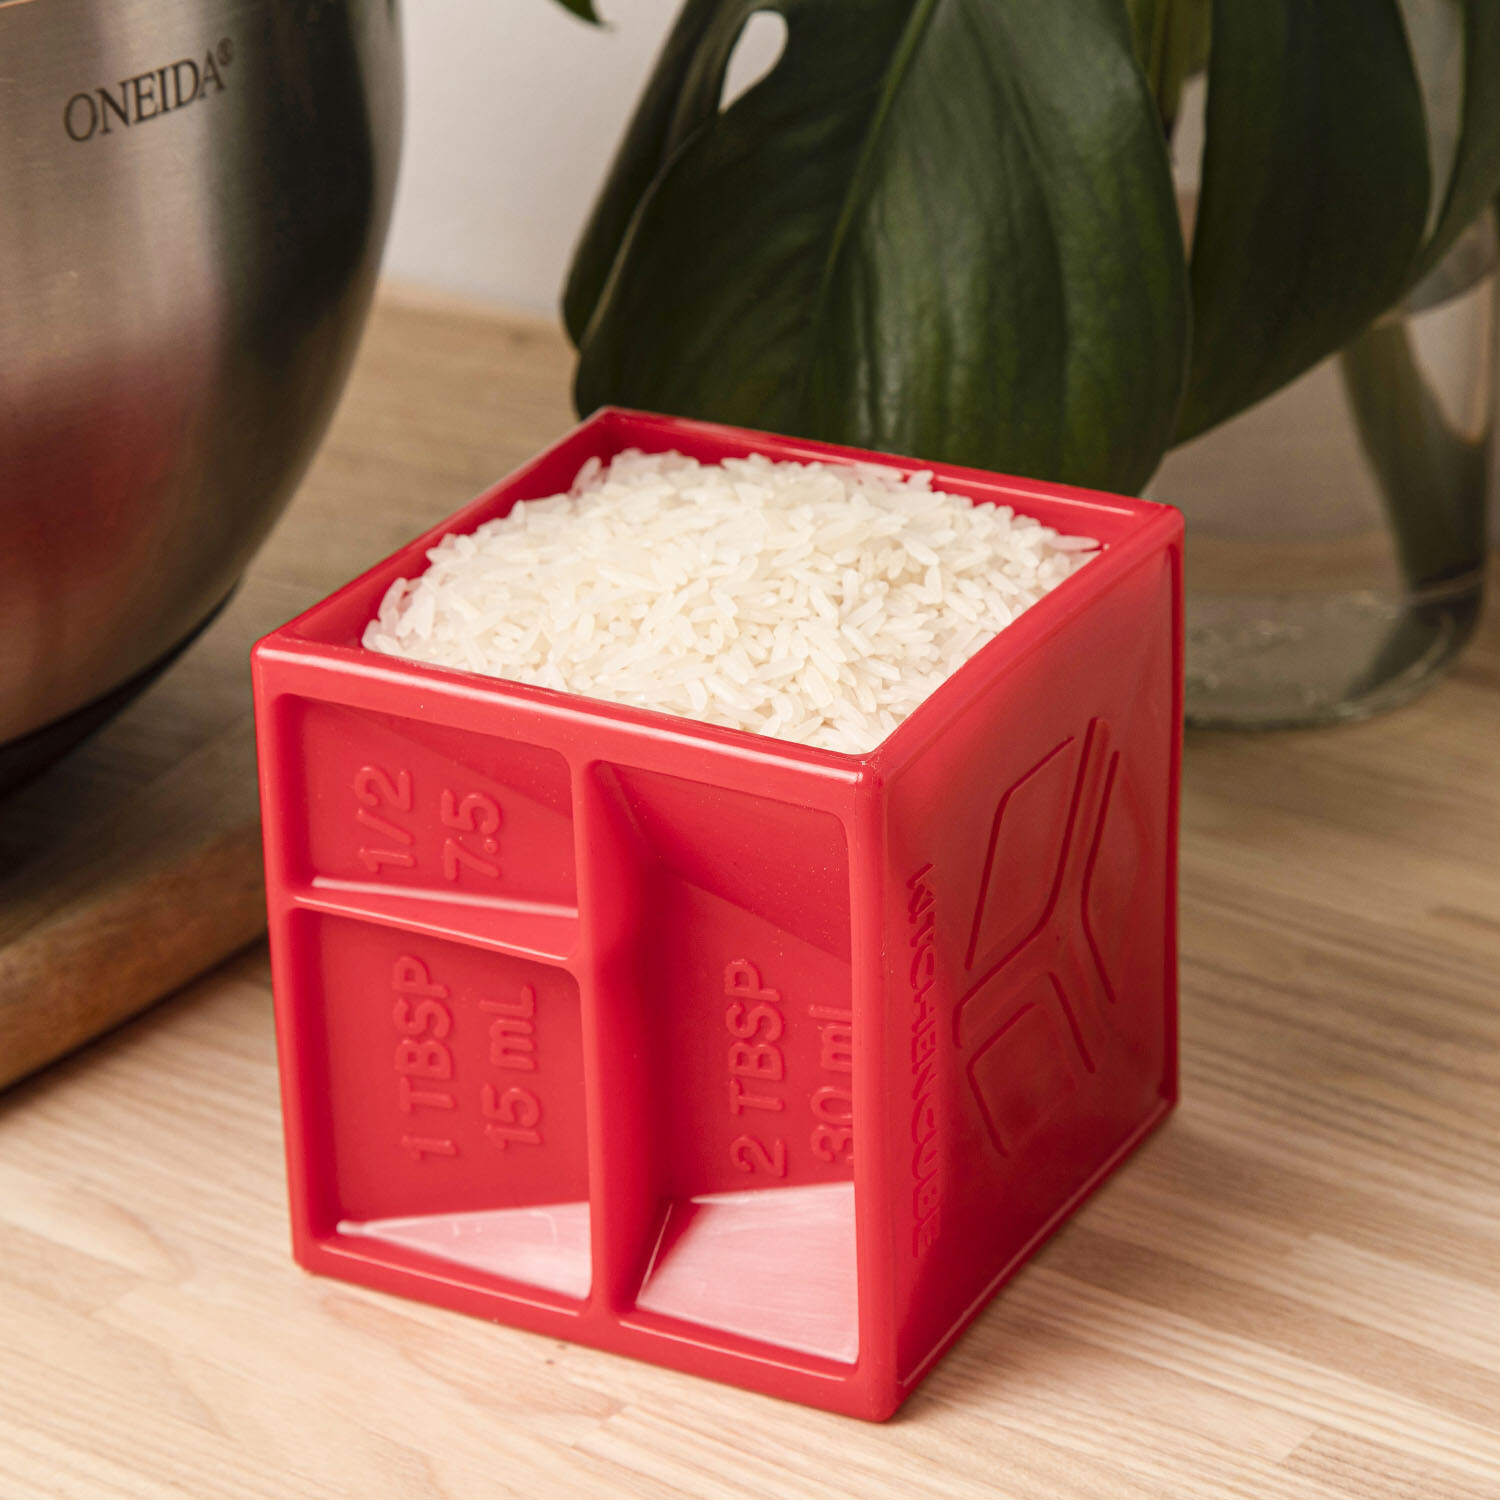 Kitchen Cube, NEW All-In-1 Measuring Device